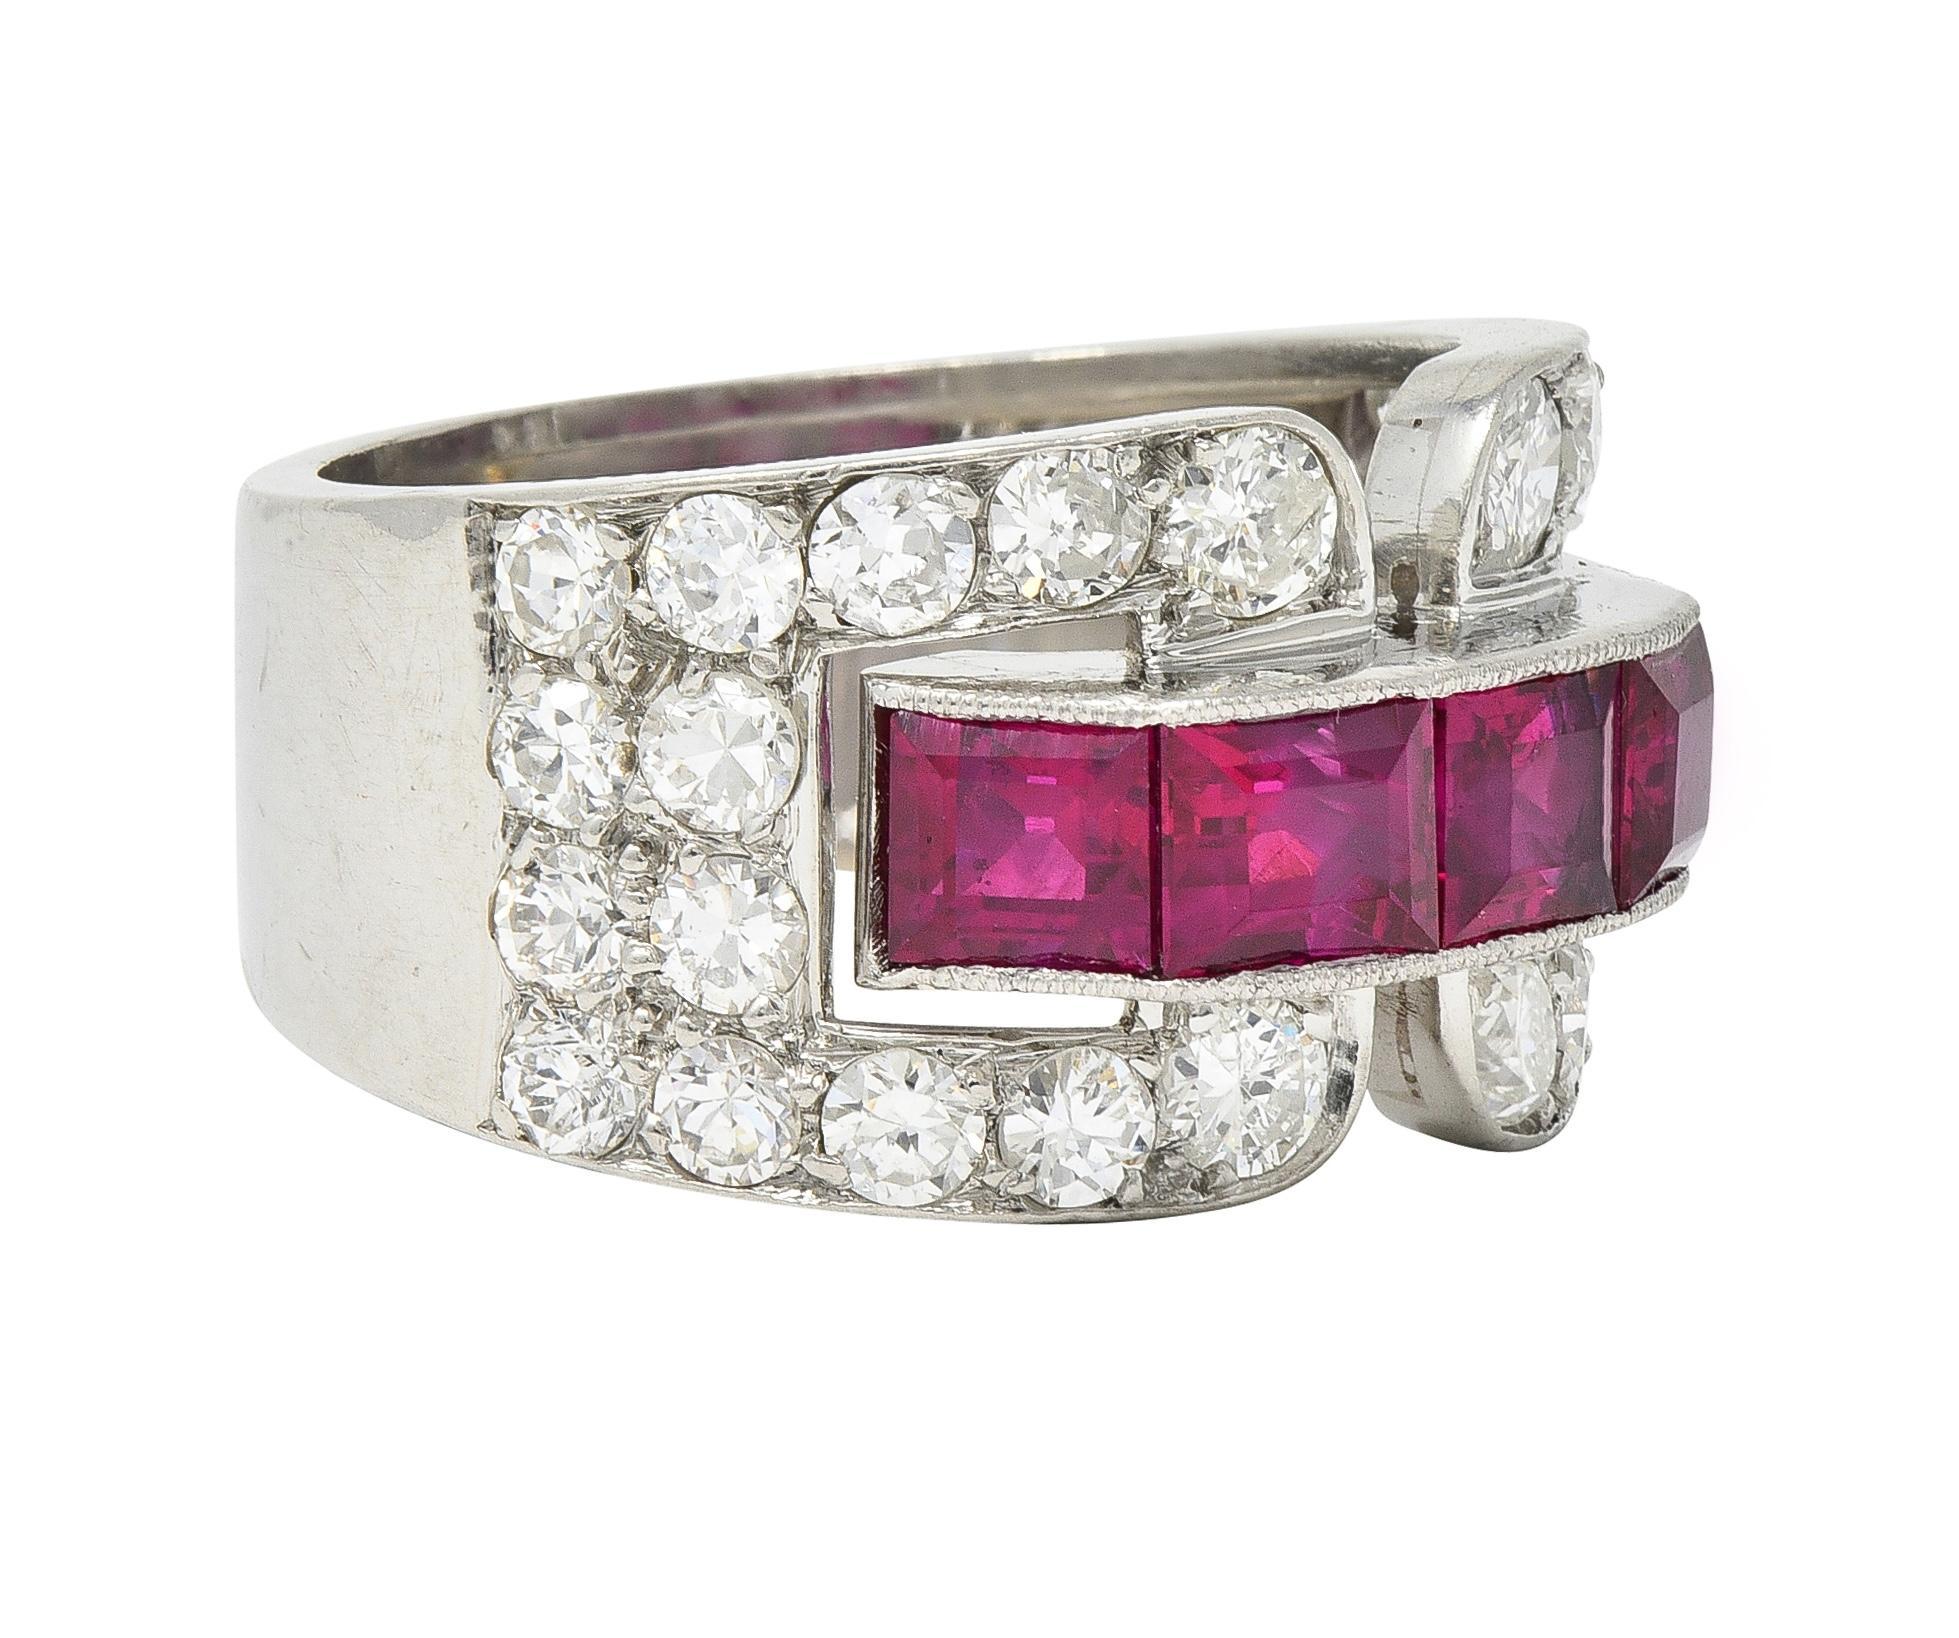 Centering an east to west row of channel set step-cut rubies weighing approximately 3.40 carats
Transparent medium purplish red in color - accented by milgrain edges
Flanked by buckle motif shoulders bead set with transitional cut diamonds
Weighing